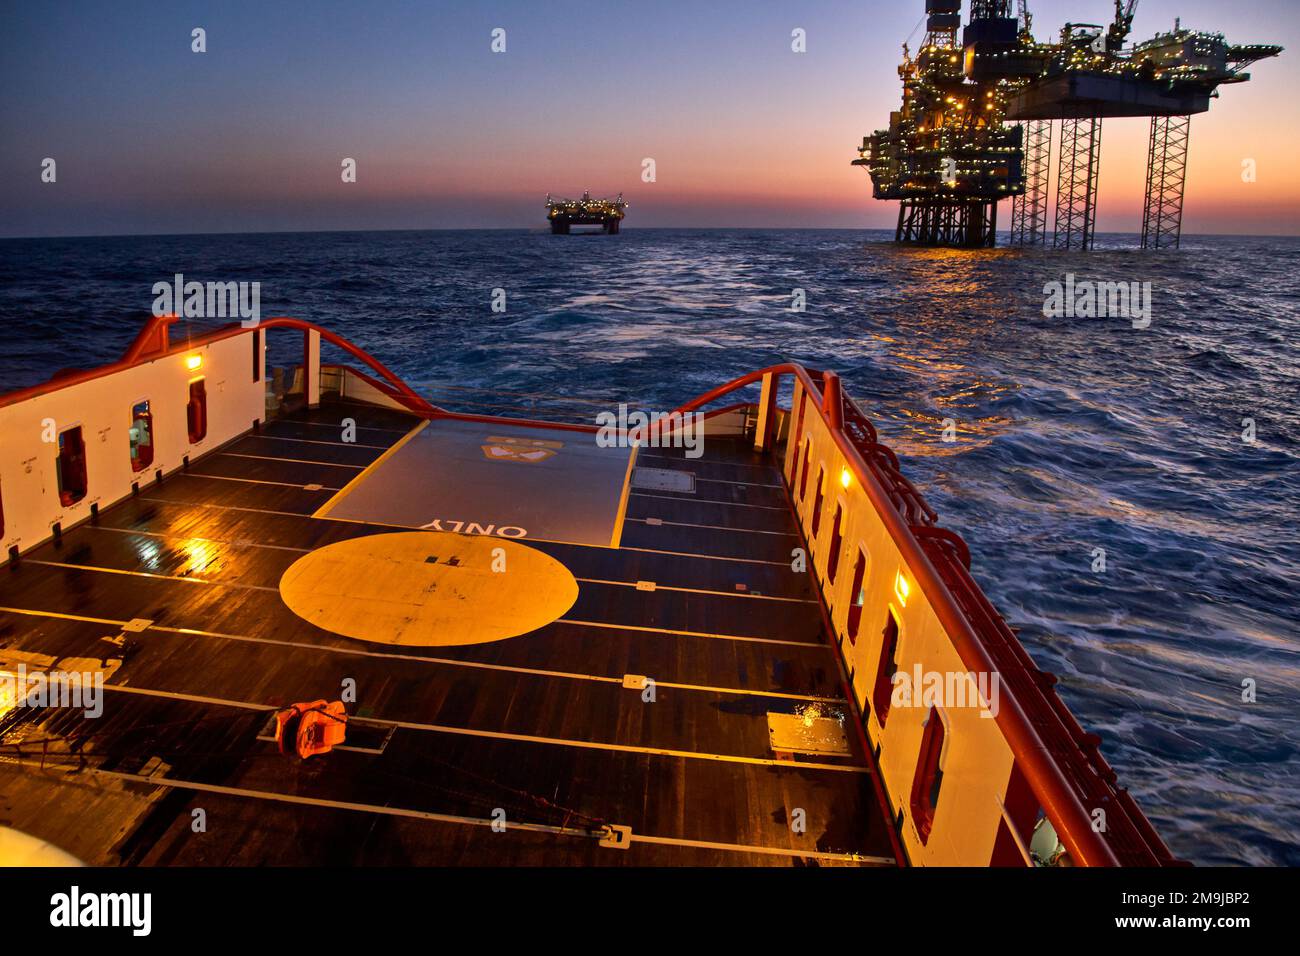 Supply vessel going for cargo operations for oil production plant. Dynamic positioning vessel going for cargo operations for jack up rig. Stock Photo